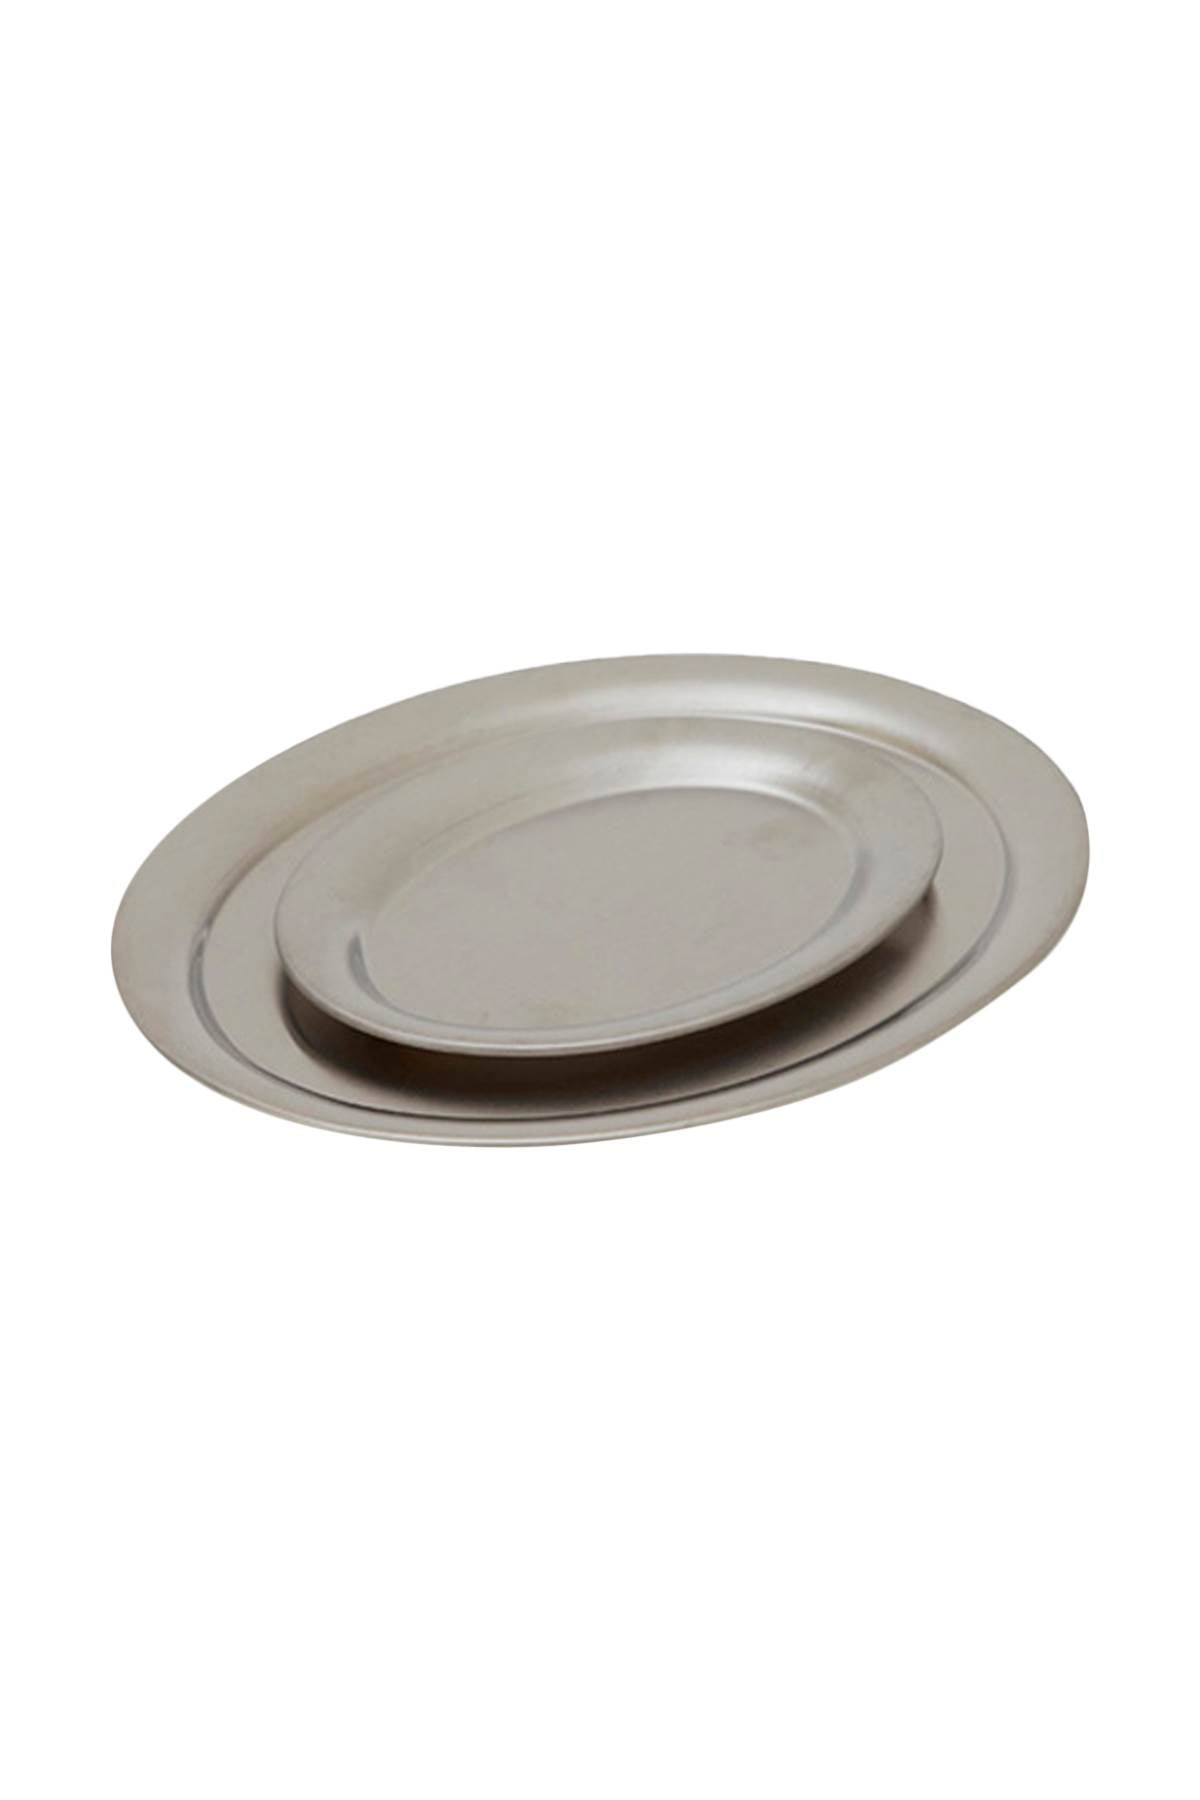 set of 2 stainless steel trays SP009 VARIANTE ABBINATA